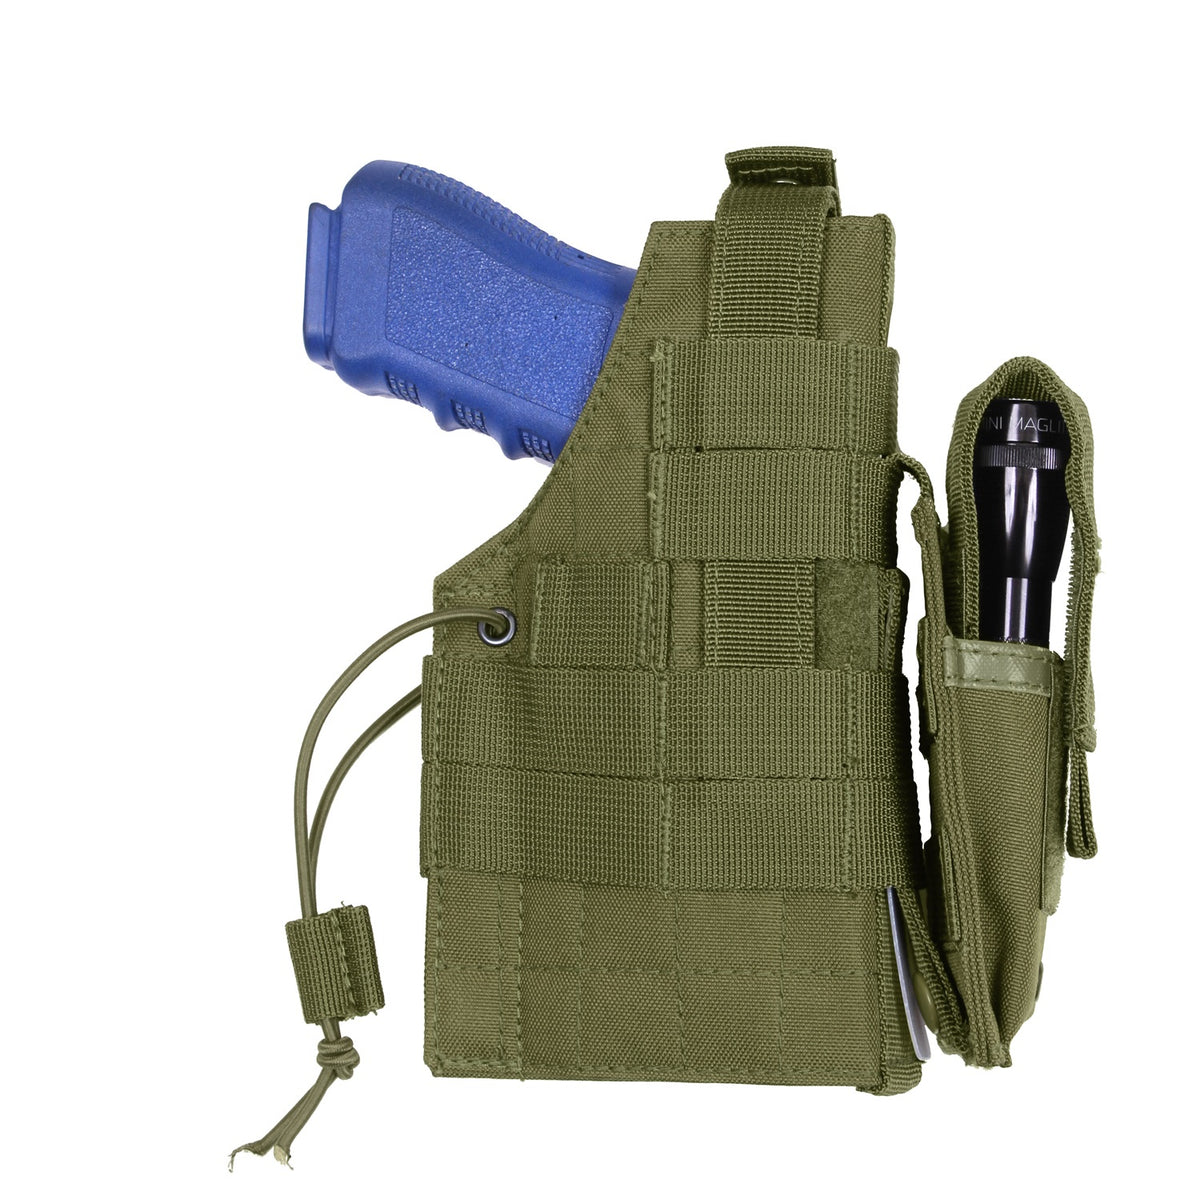 Rothco MOLLE Modular Ambidextrous Holster Olive Drab